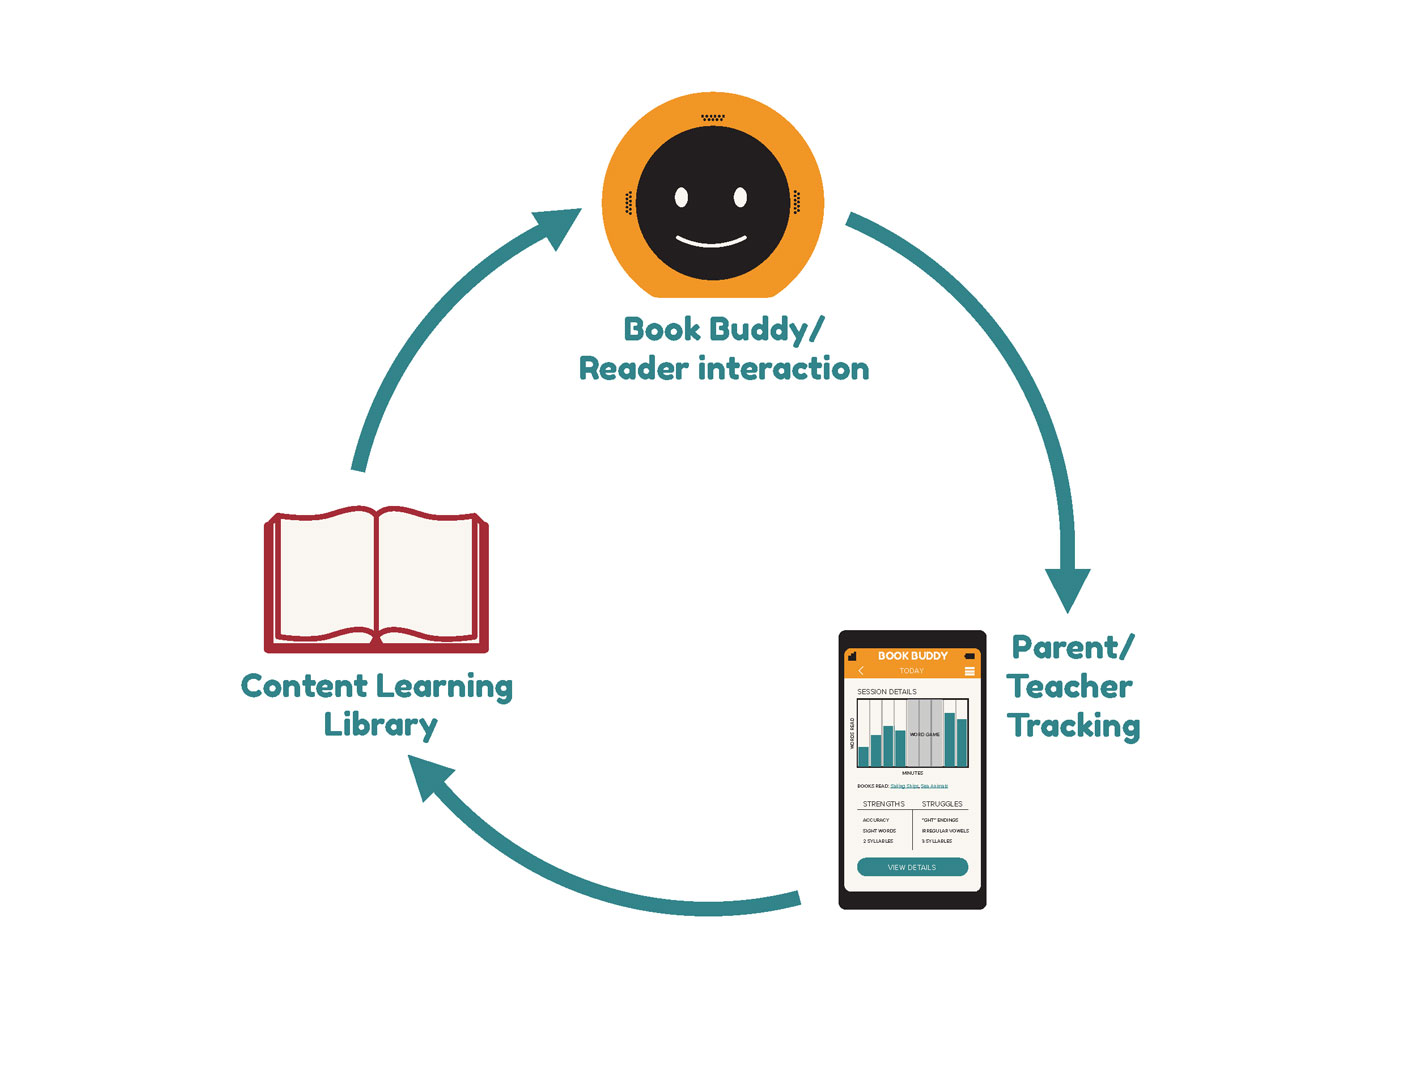 diagram showing the circular relationship of the Book Buddy Product ecosystem